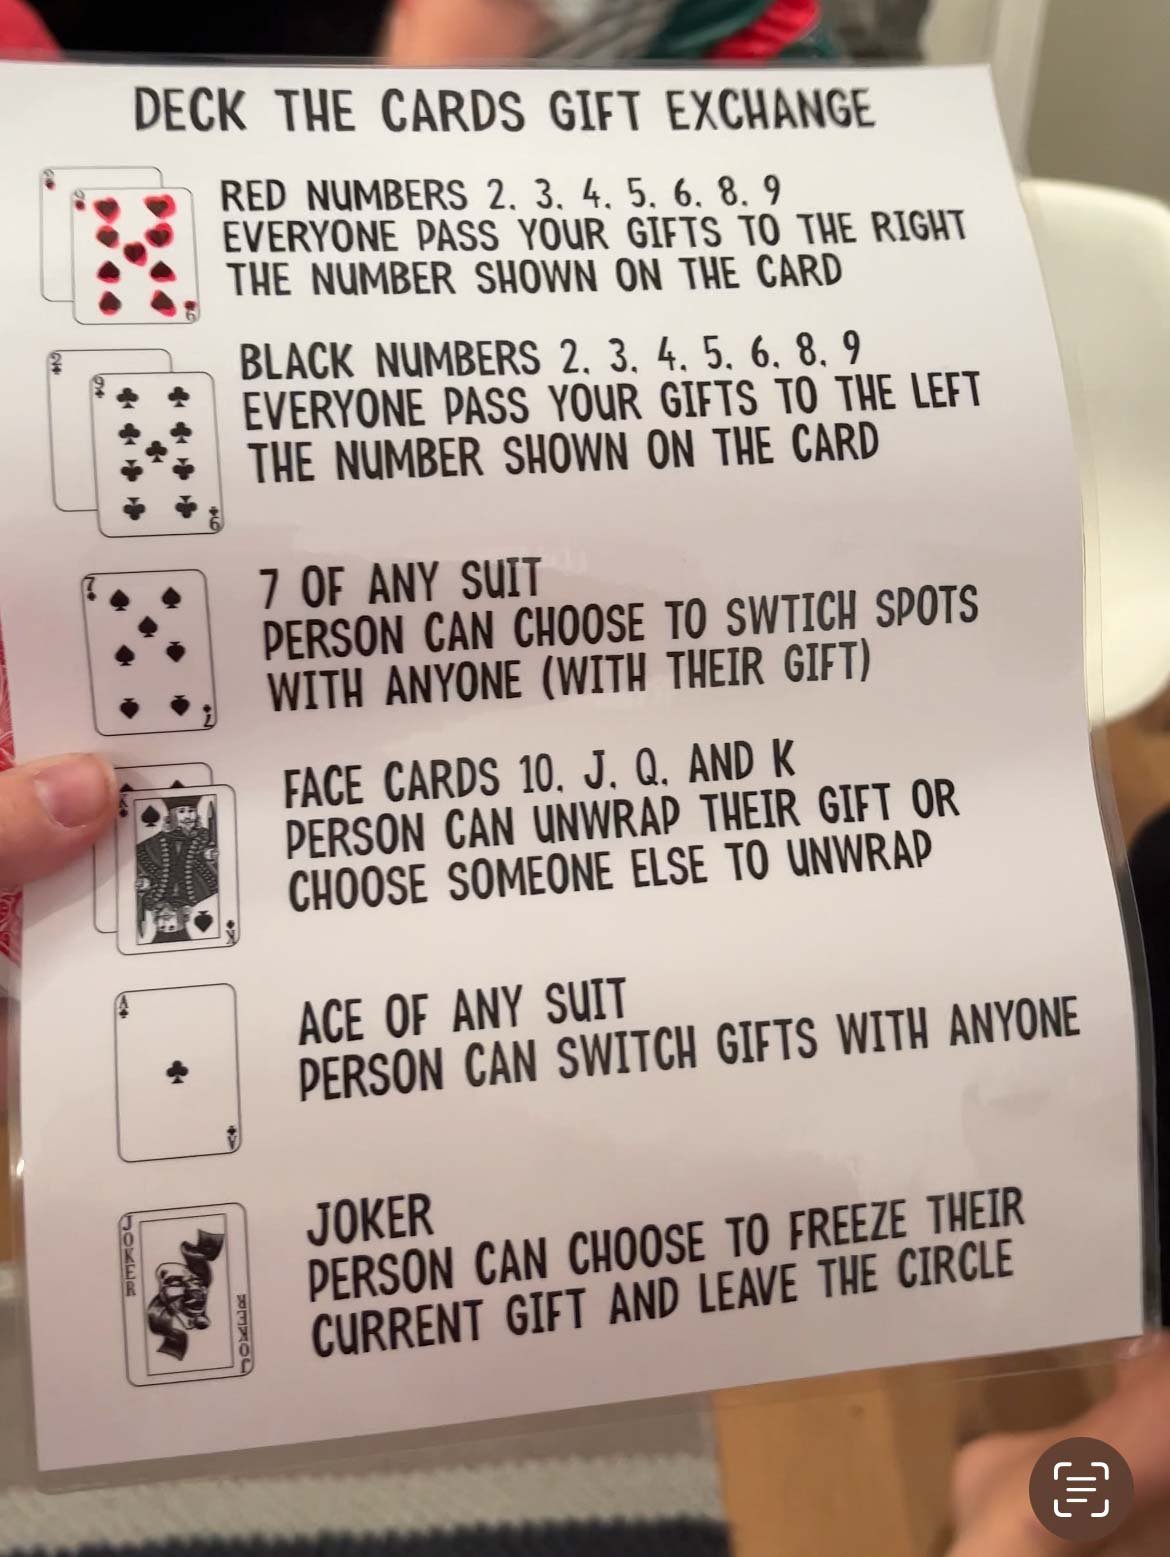 hand holding a card guide to a deck of cards gift exchange